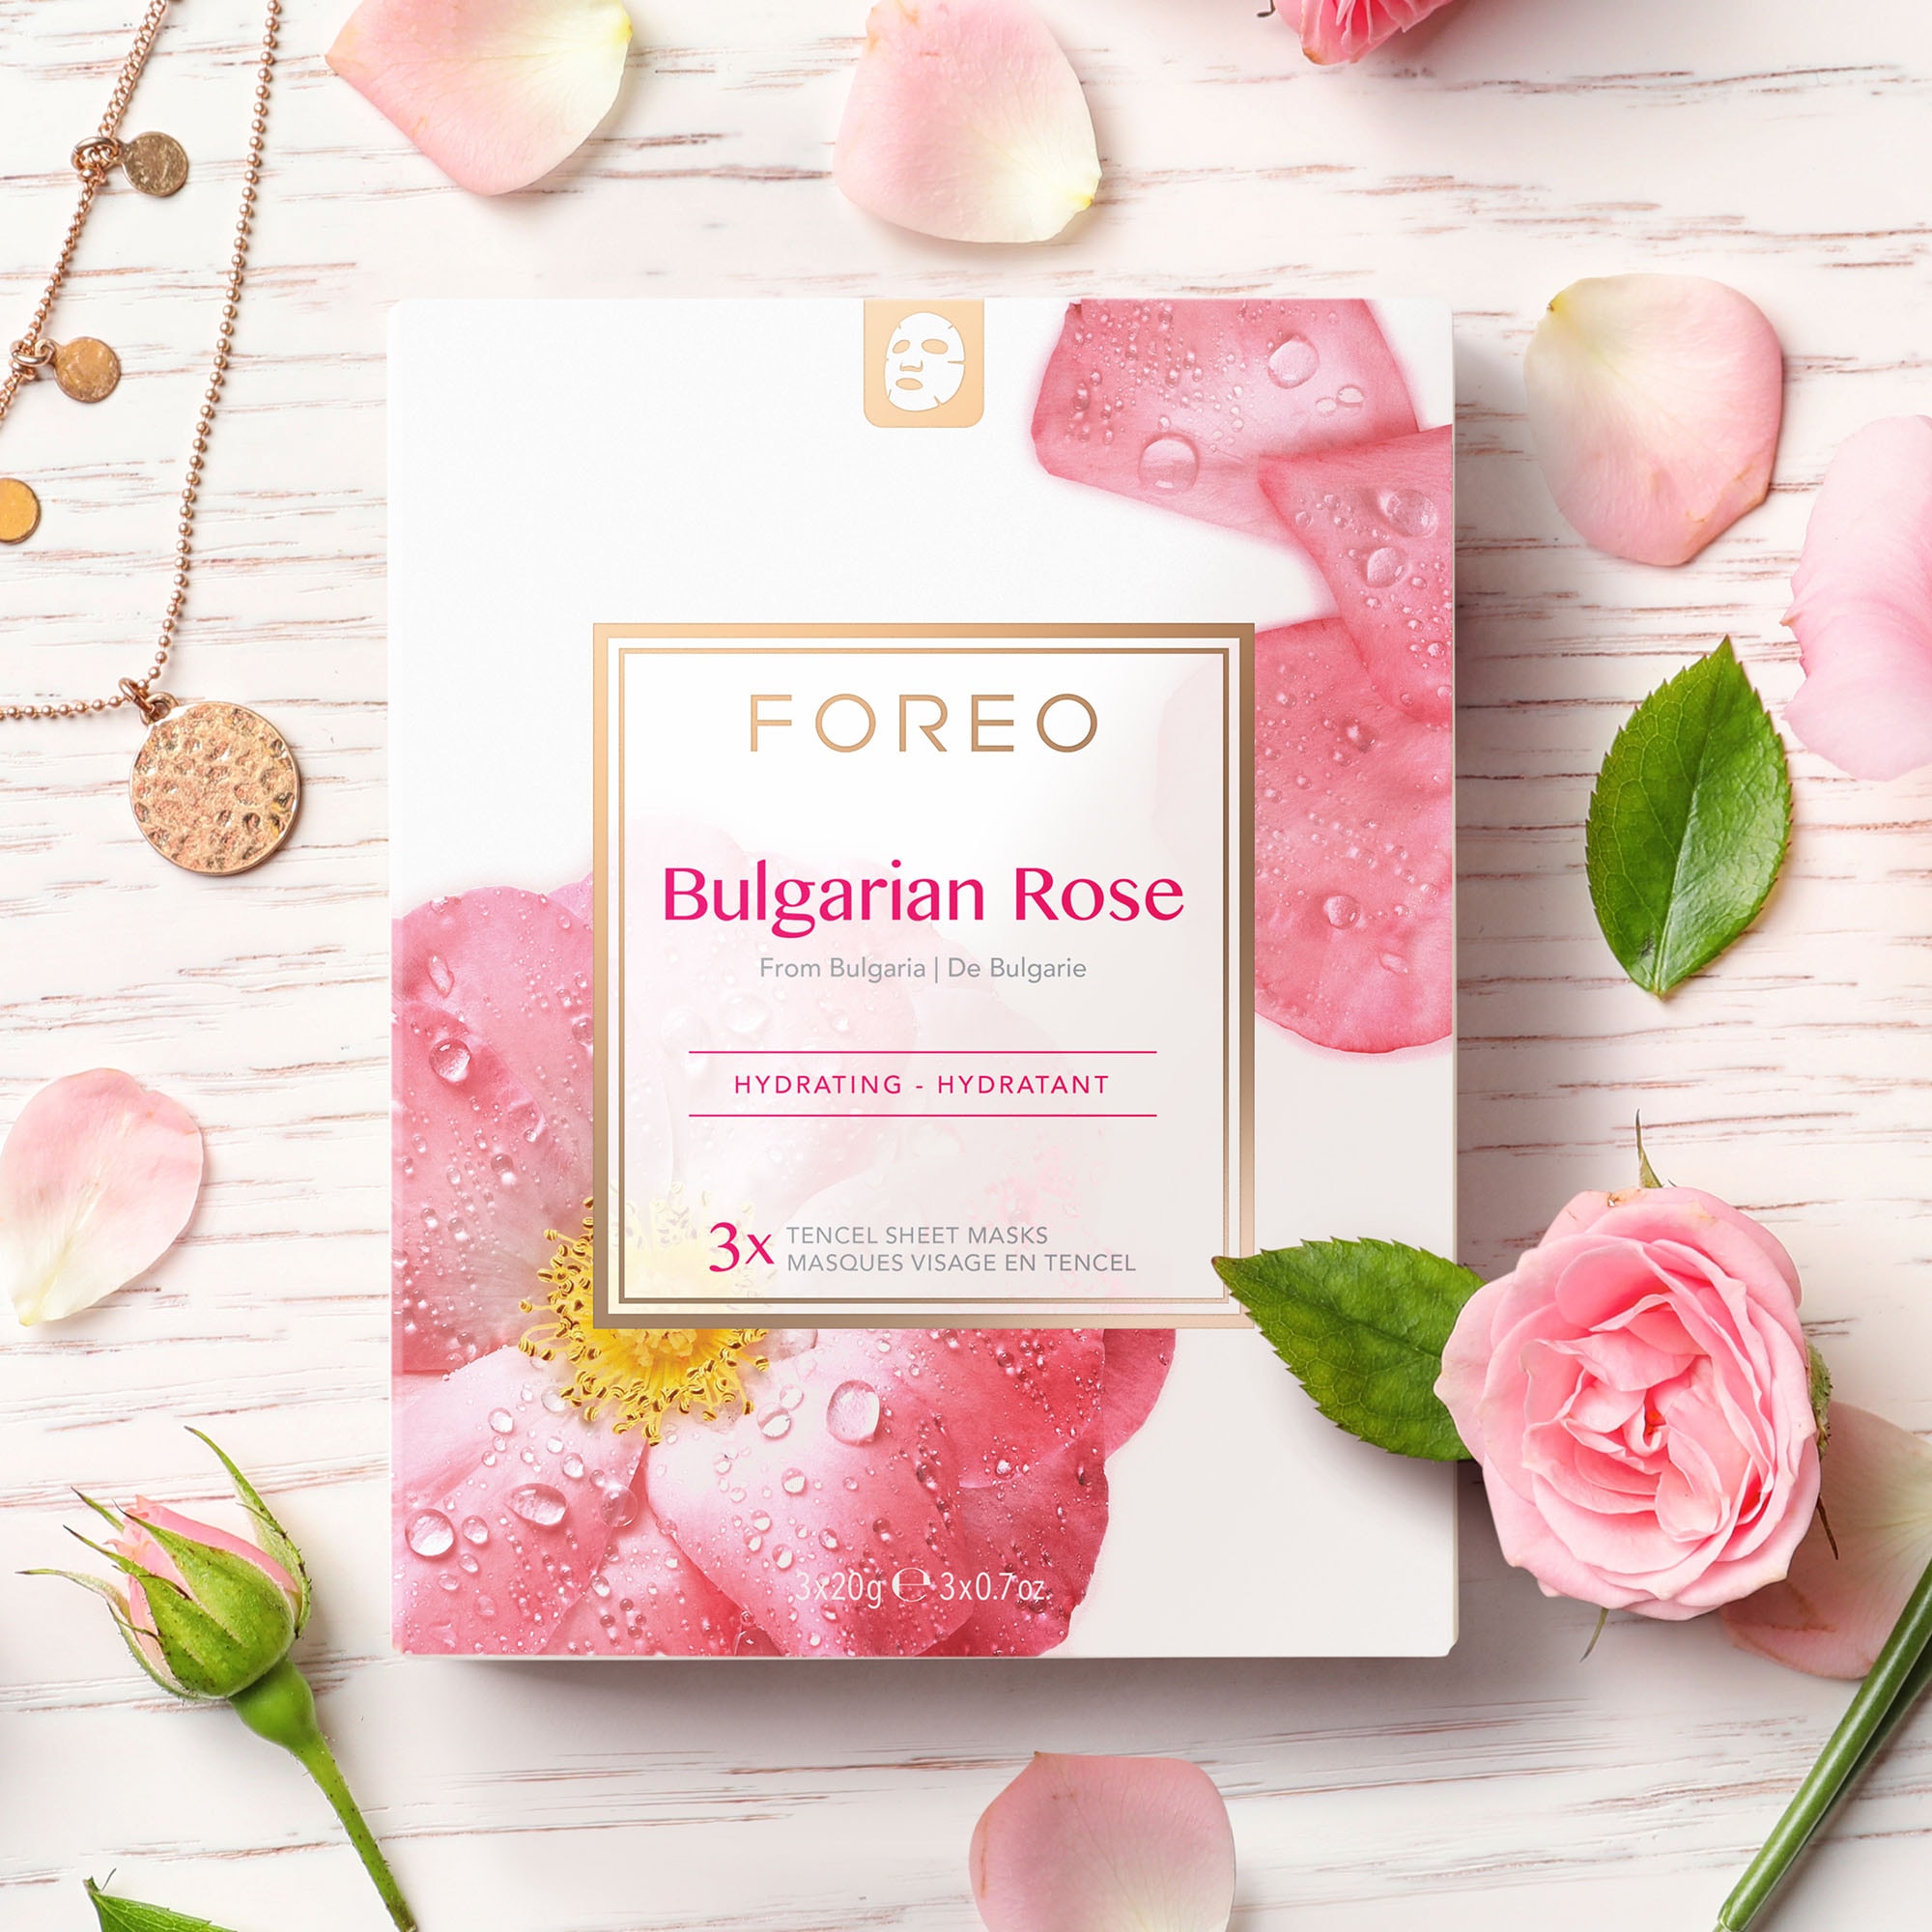 (3 Gesichtsmaske tlg.) online Bulgarian Rose«, Face Masks »Farm To Collection OTTO bei Sheet FOREO